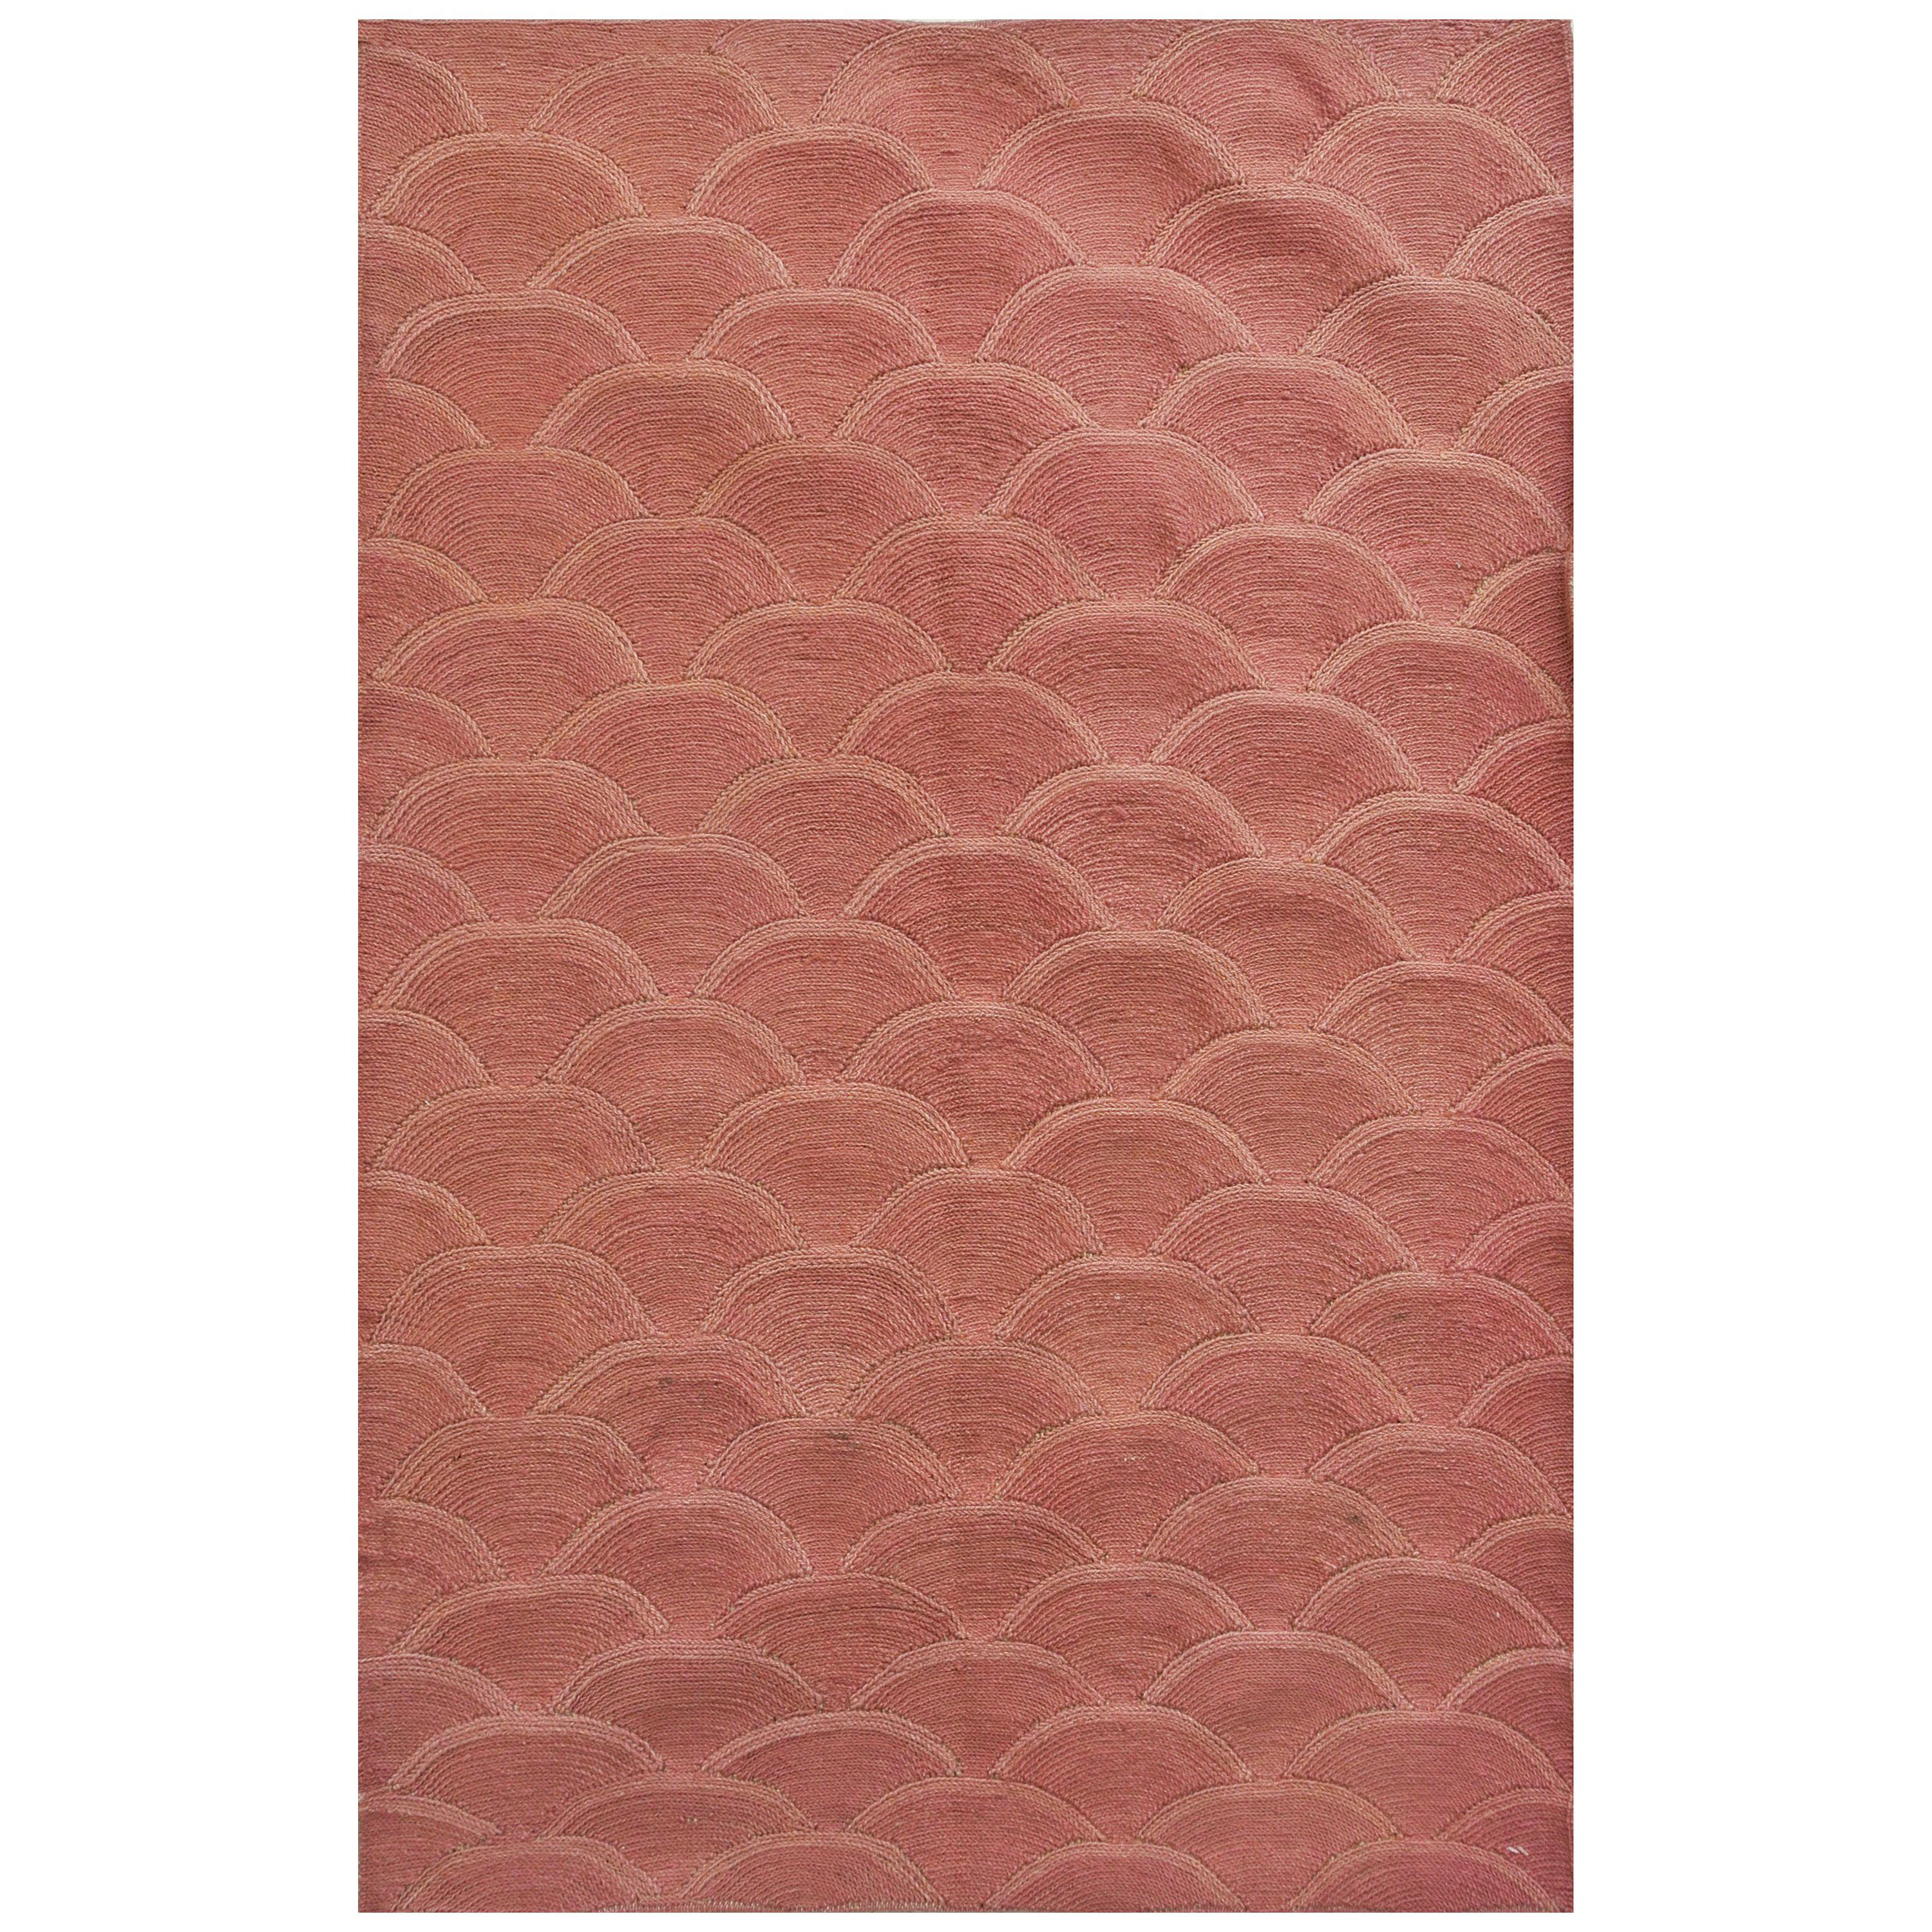 Pink Modern Persian Rug, Wool, Orley Shabahang, 3' x 5' For Sale